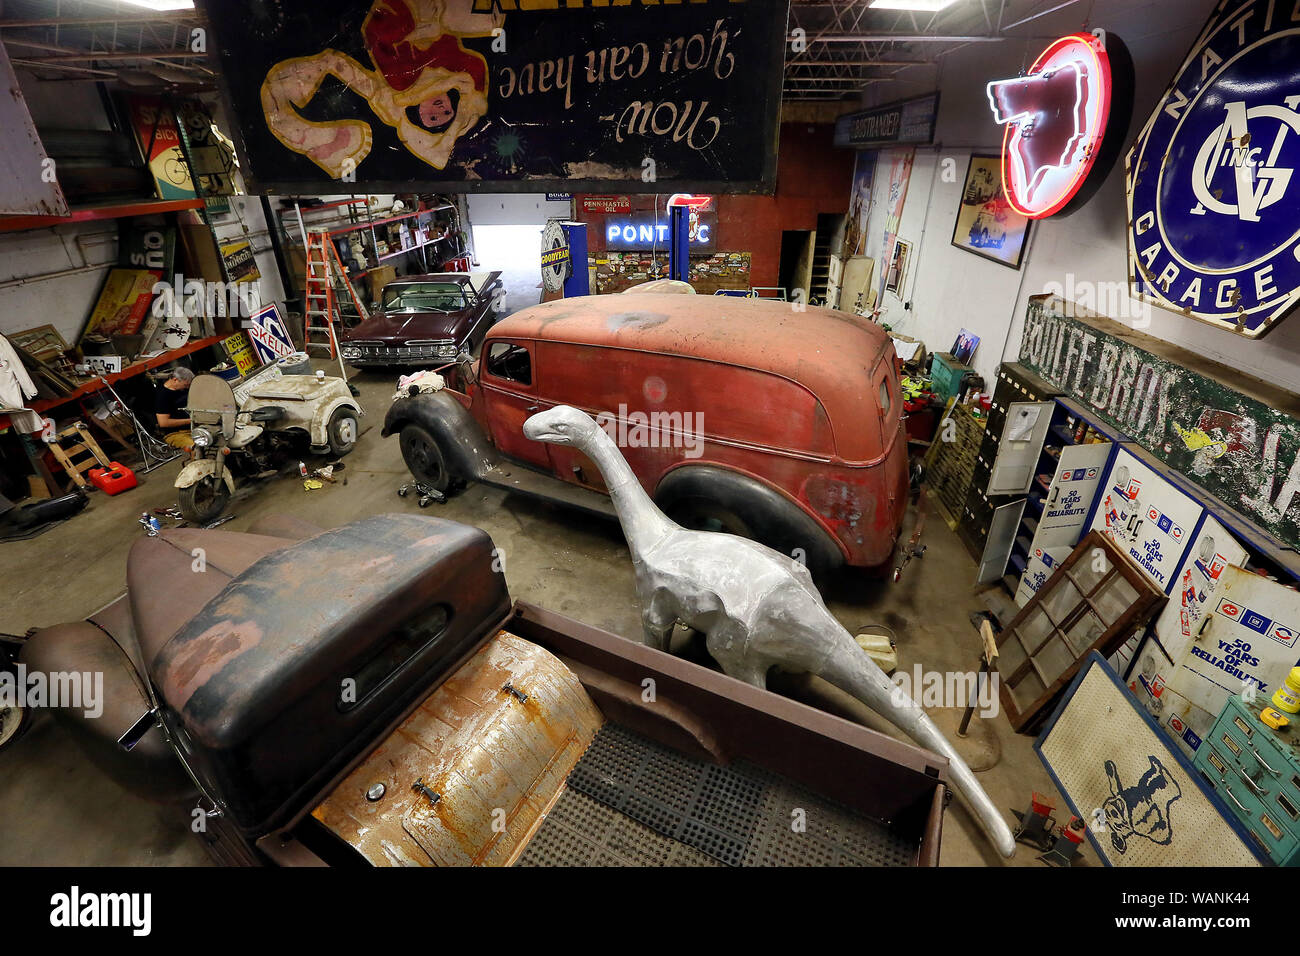 August 21, 2019, Davenport, Iowa, USA: Several classic vehicles and Dino The Sinclair dinosaur are part of Robb Wolfe's collection at his Davenport warehouse location. Wolfe is promoting the ''Davenport Americana'' show September 12-14, 2019 at the Mississippi Valley Fairgrounds. The event brings three shows together at one location, the Past Gas Car Show & Cruise, the Davenport Americana Show and the Premiere Petroliana Auction. (Credit Image: © Kevin E. Schmidt/Quad-City Times via ZUMA Wire) Stock Photo